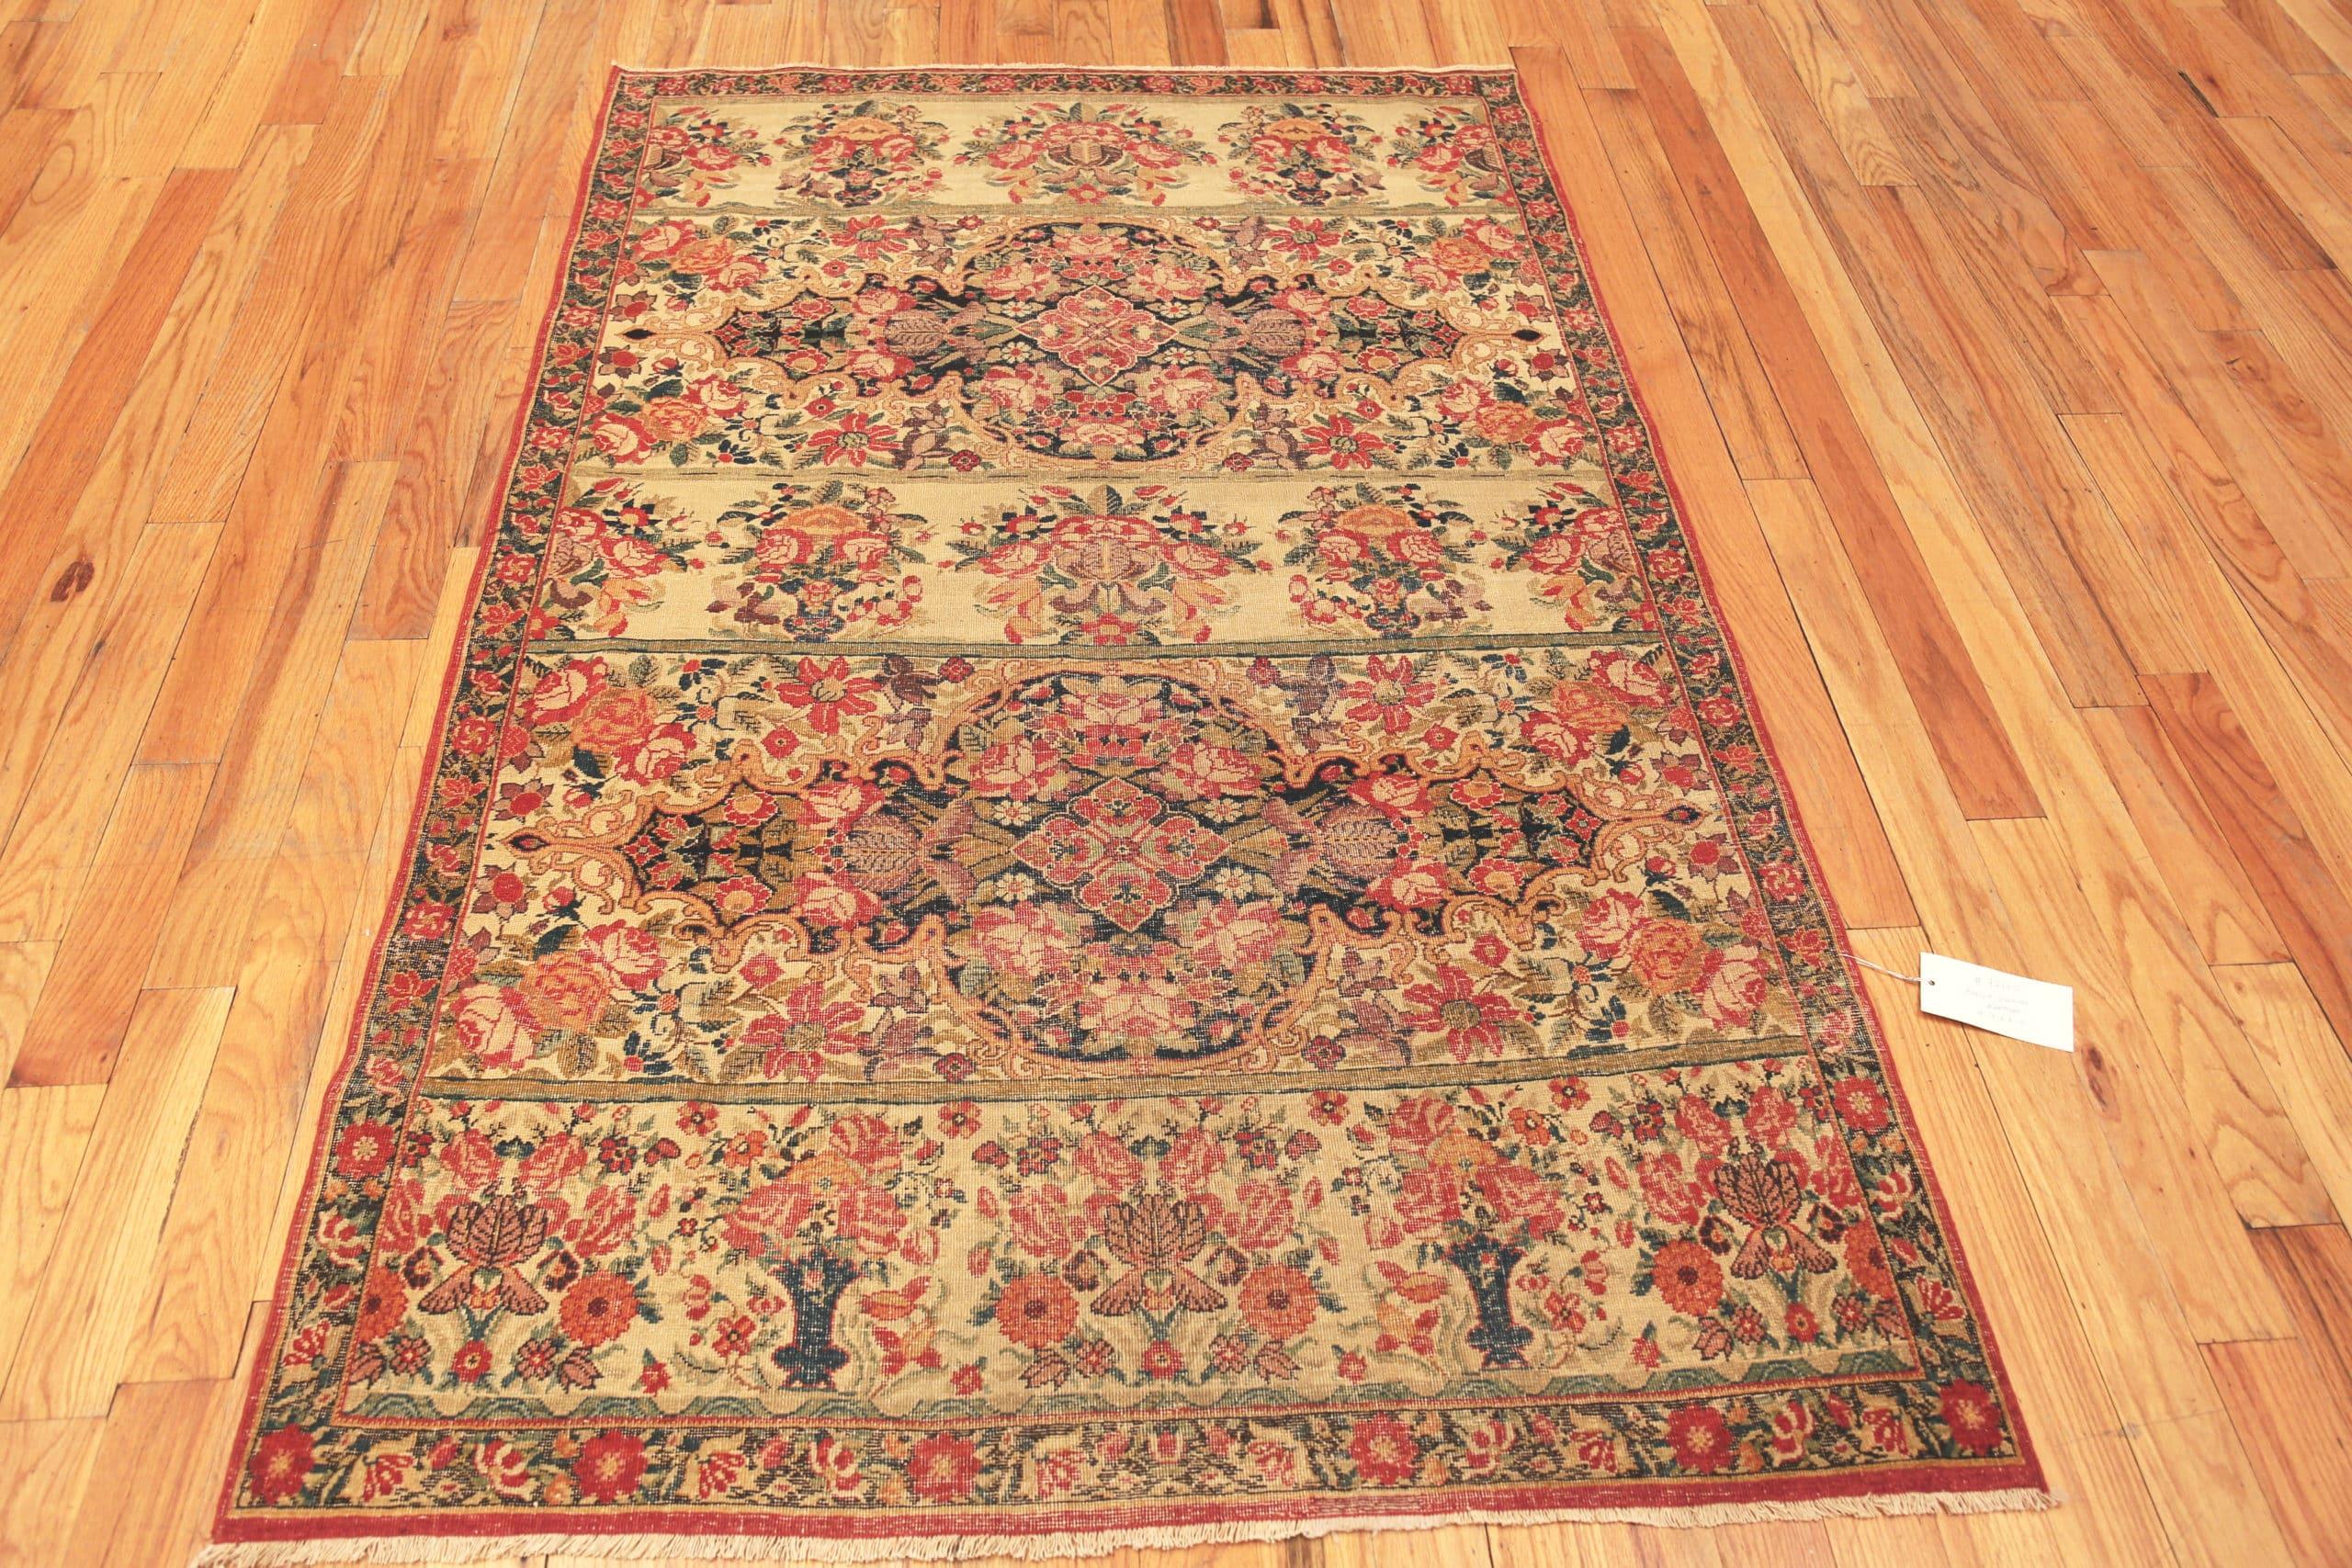 Fine Quality Pair Of Classic Floral Vase Design Antique Persian Kerman Rugs, Country of Origin: Persia, Circa date: 1900. Size: 4 ft 3 in x 6 ft 6 in (1.3 m x 1.98 m)